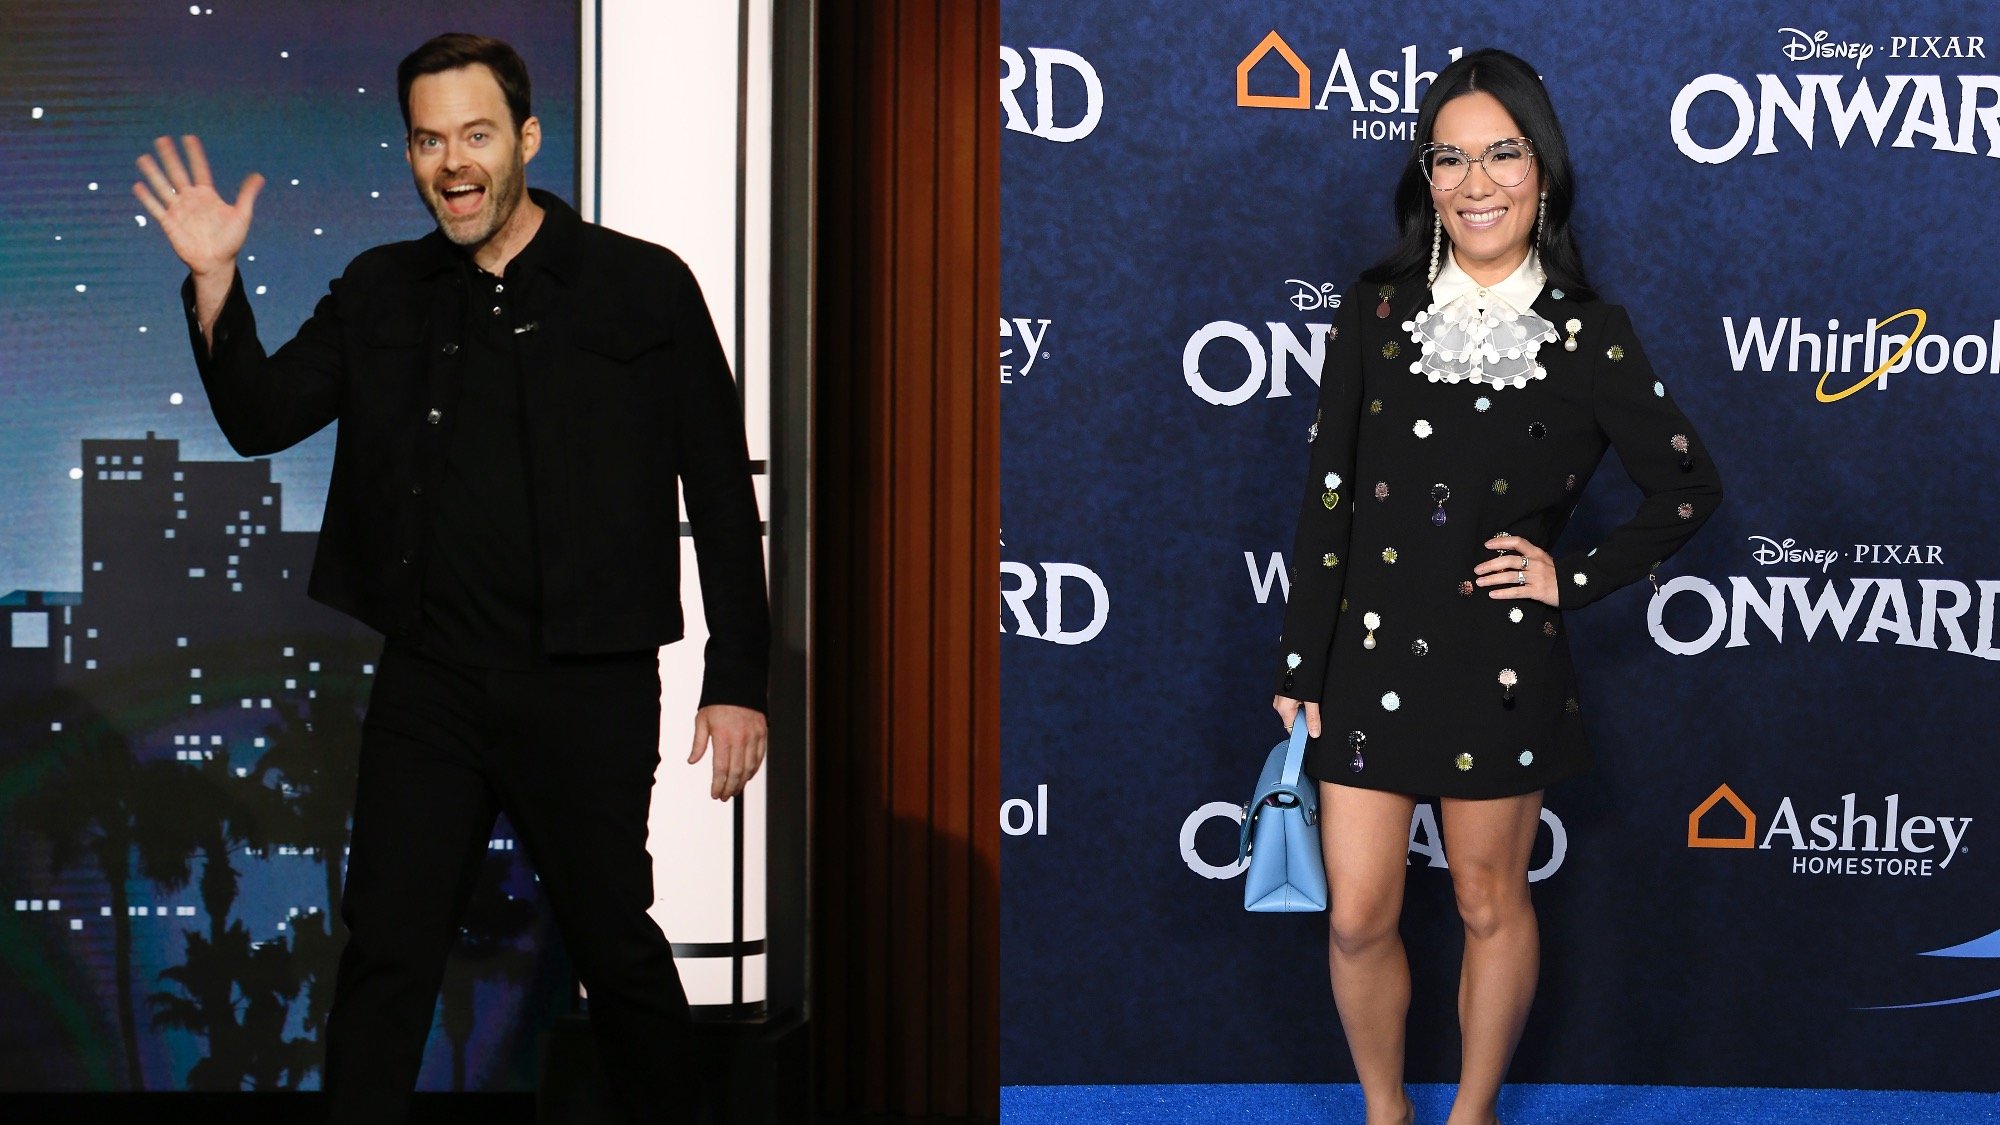 (L) Bill Hader on "Jimmy Kimmel Live!" in 2022. (R) Ali Wong arrives at the Premiere Of Disney And Pixar's "Onward" on February 18, 2022.